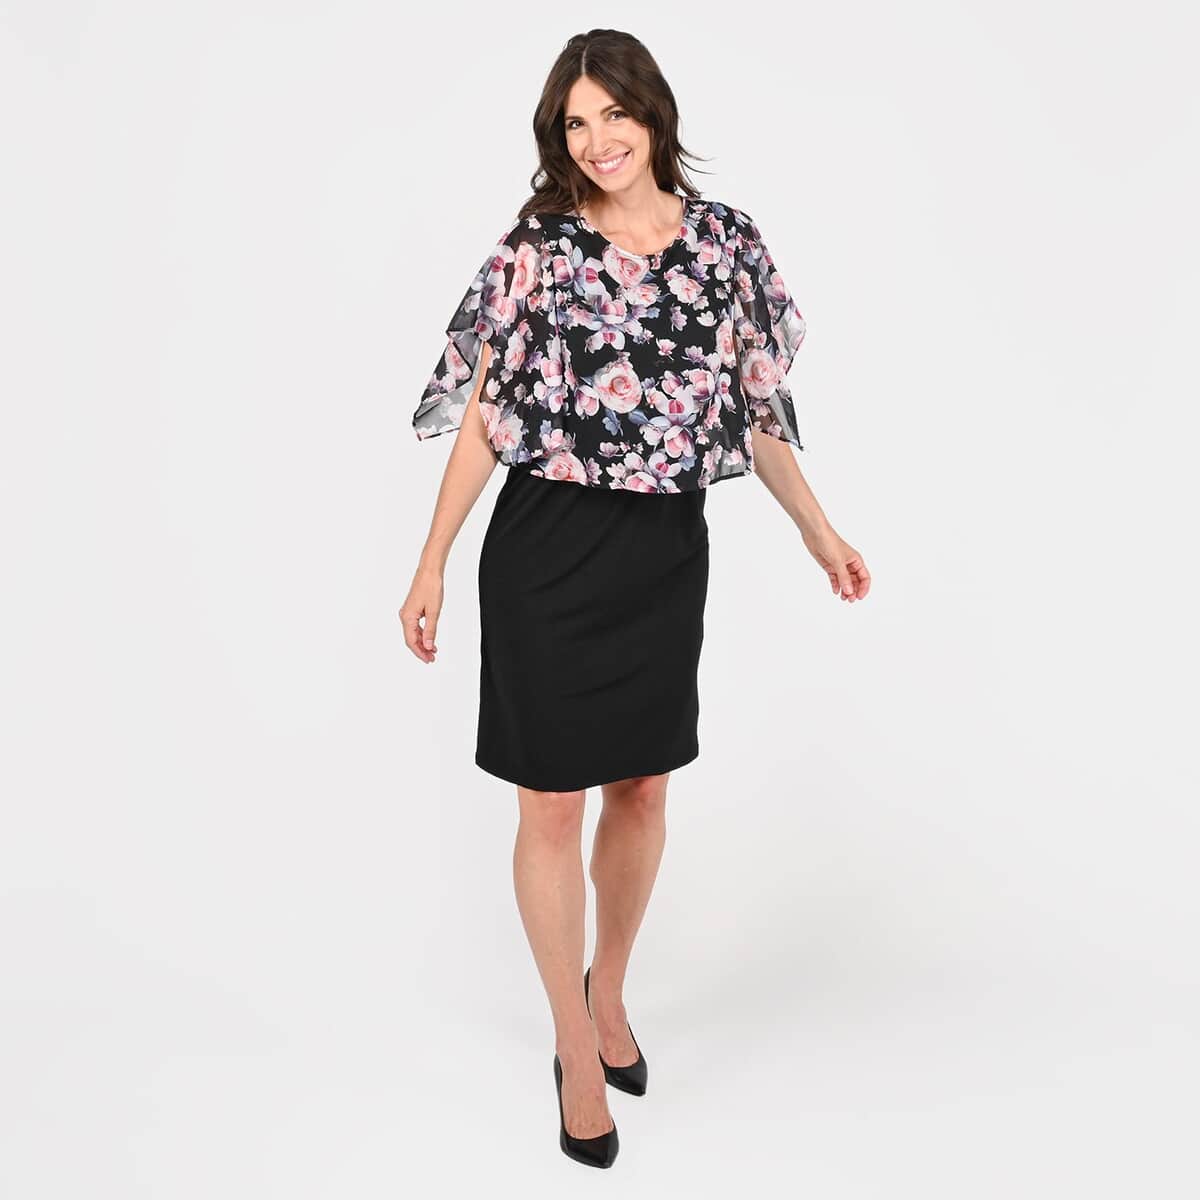 TAMSY Black Floral Dress with Overlay - L image number 0